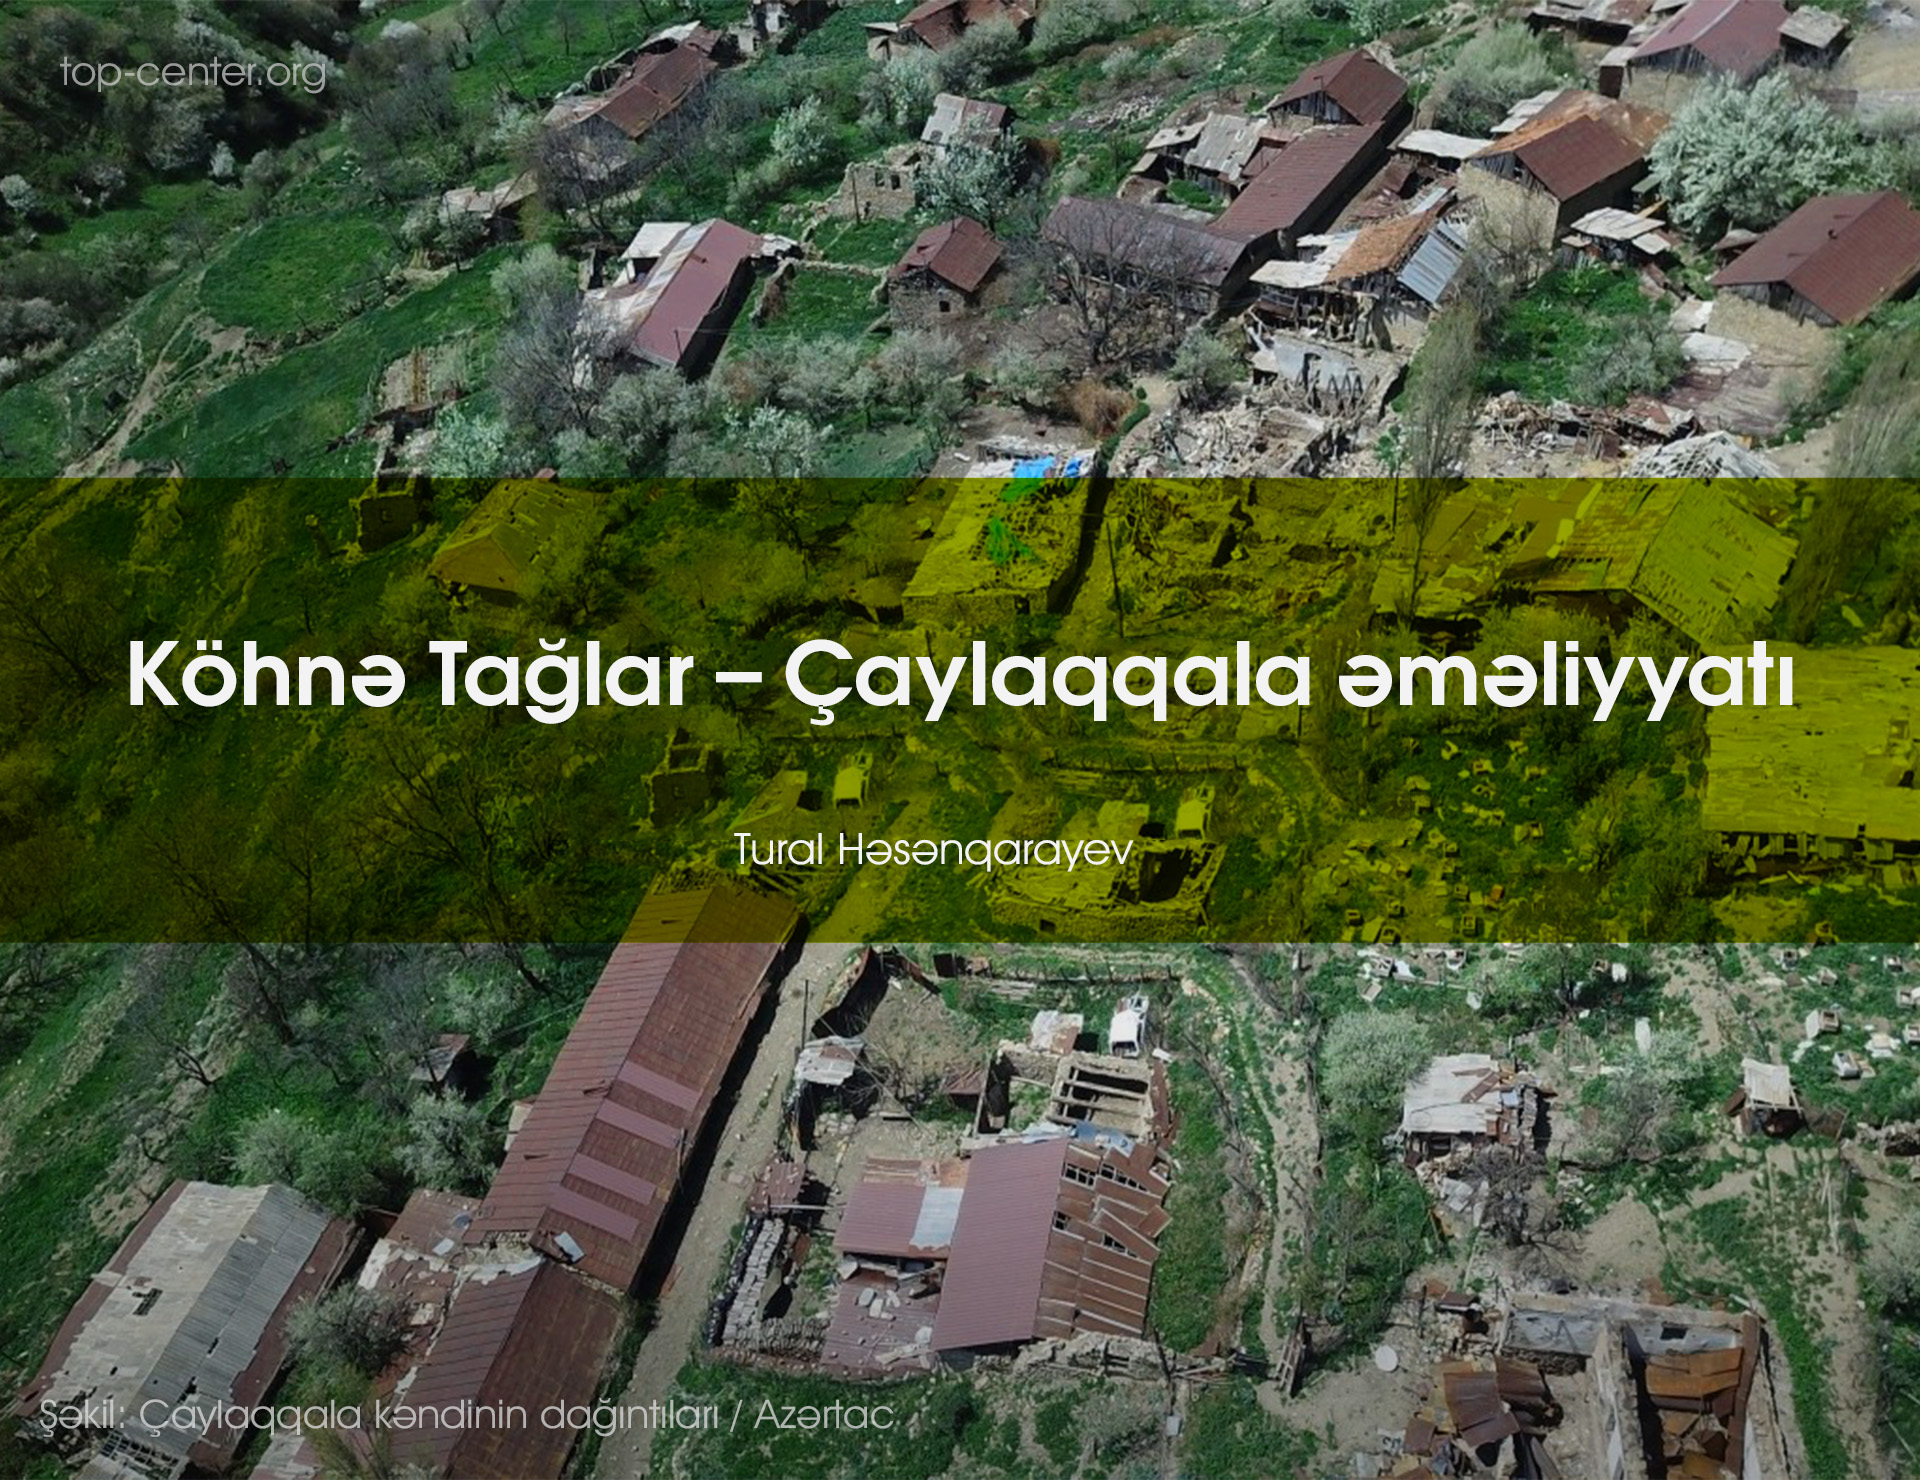 Hostilities in Kohne Taghlar - Chaylaggala  front